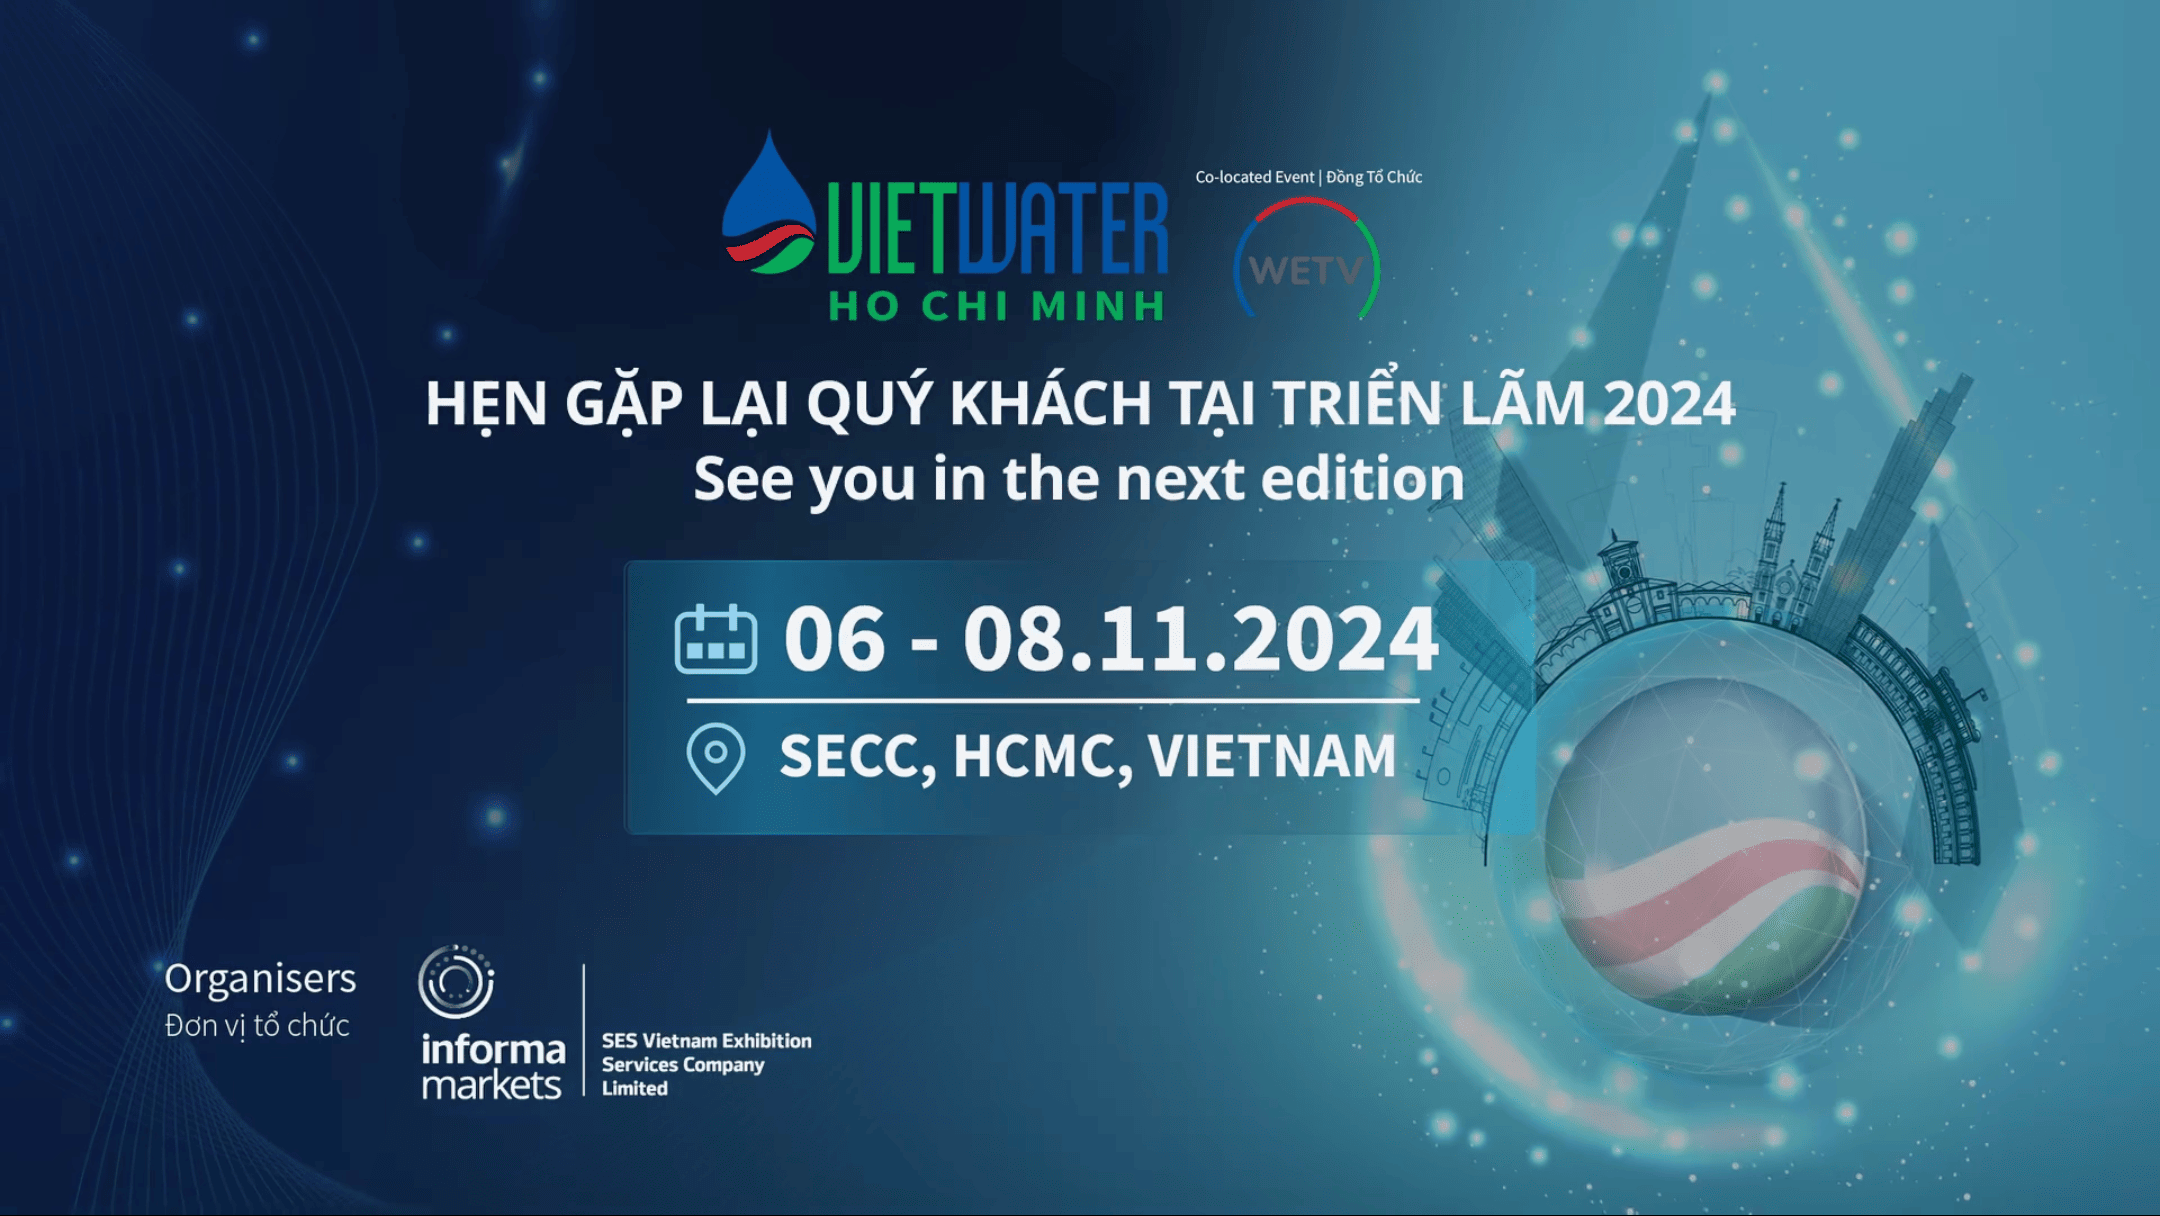 CHECK OUT HIGHLIGHTED MOMENTS AT VIETWATER 2023 and LOOK FORWARD TO THE NEXT EDITION IN NOVEMBER 2024